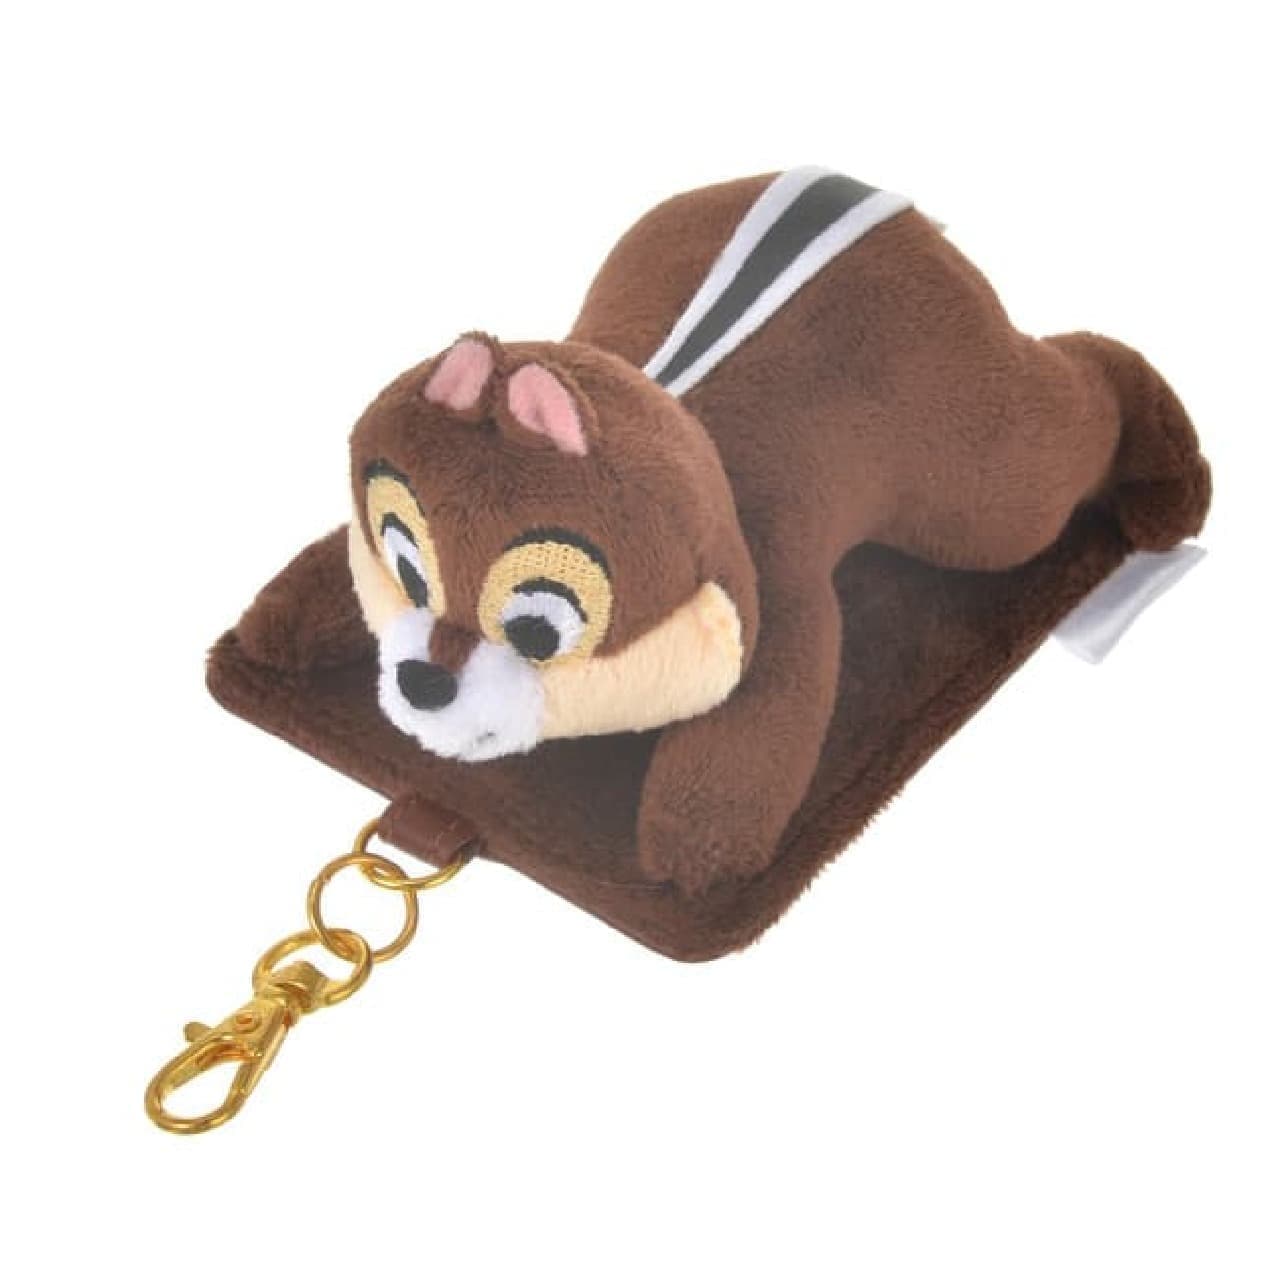 Shop Disney "Chip & Dale" New Products --Hoodies, Blankets, etc. for Fall / Winter